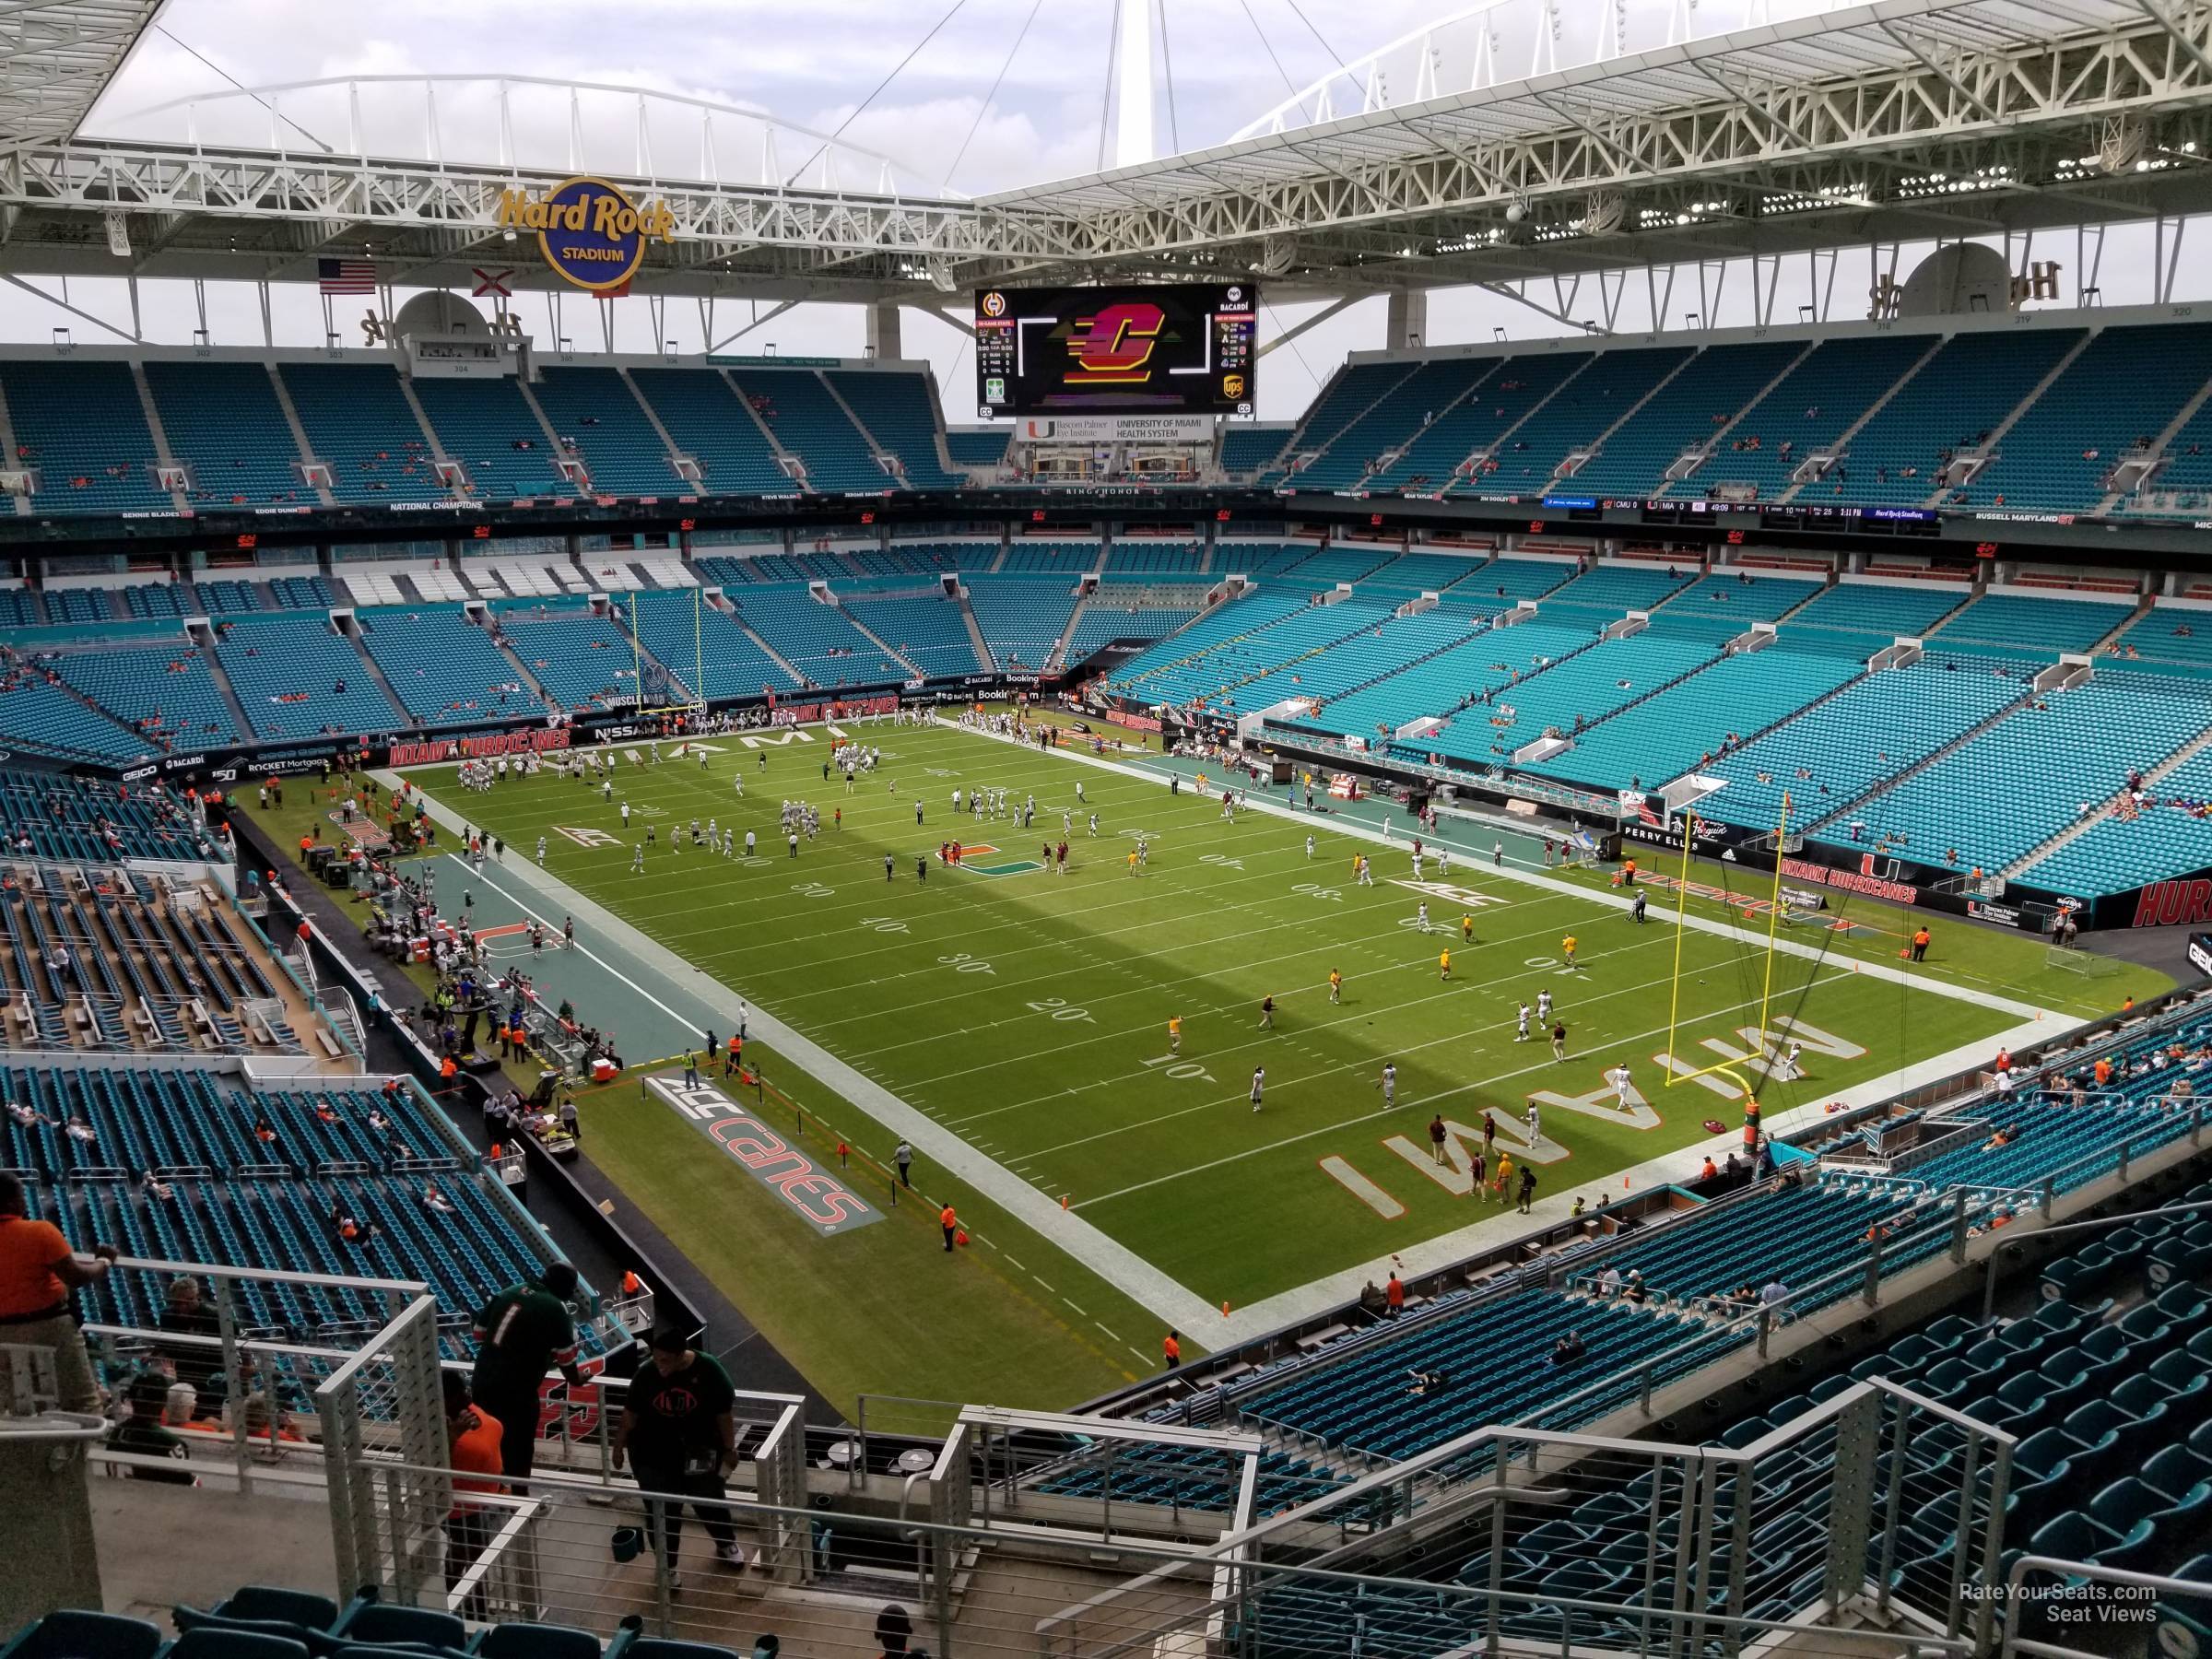 section 337, row 14 seat view  for football - hard rock stadium